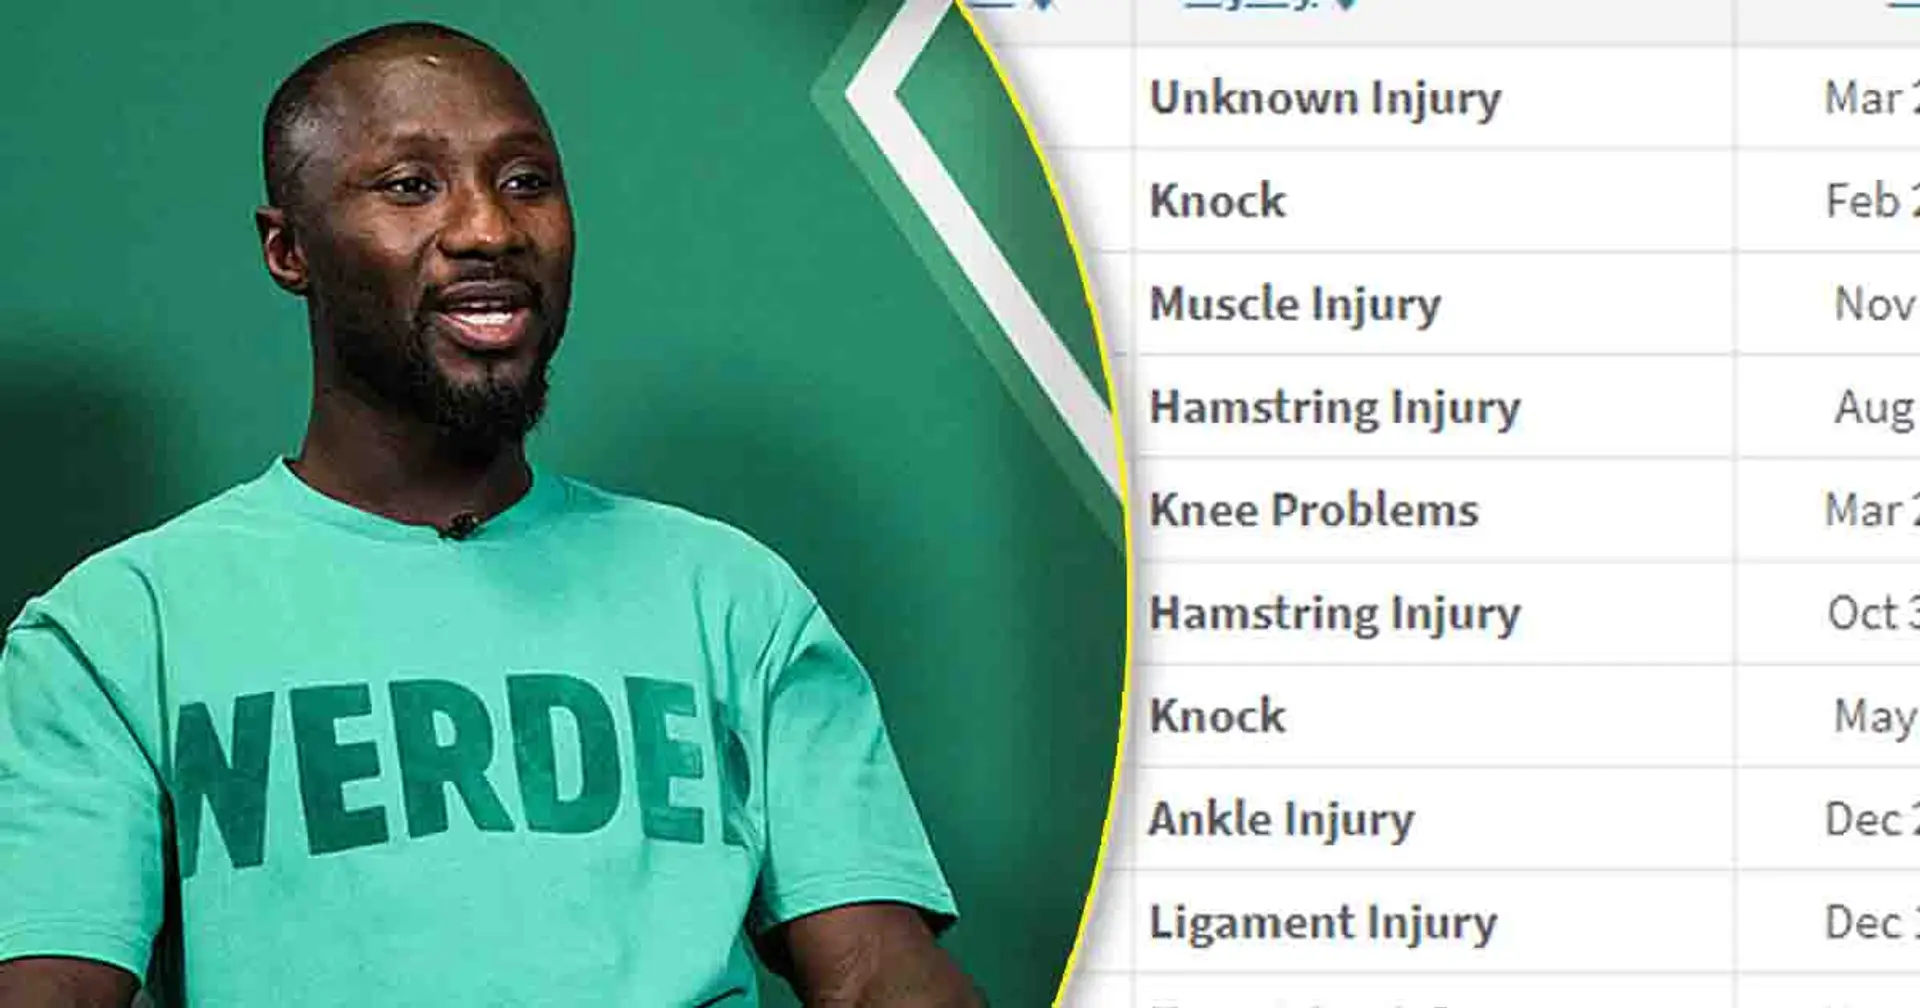 'The injuries are behind me': Naby Keita makes vow after Werder Bremen move